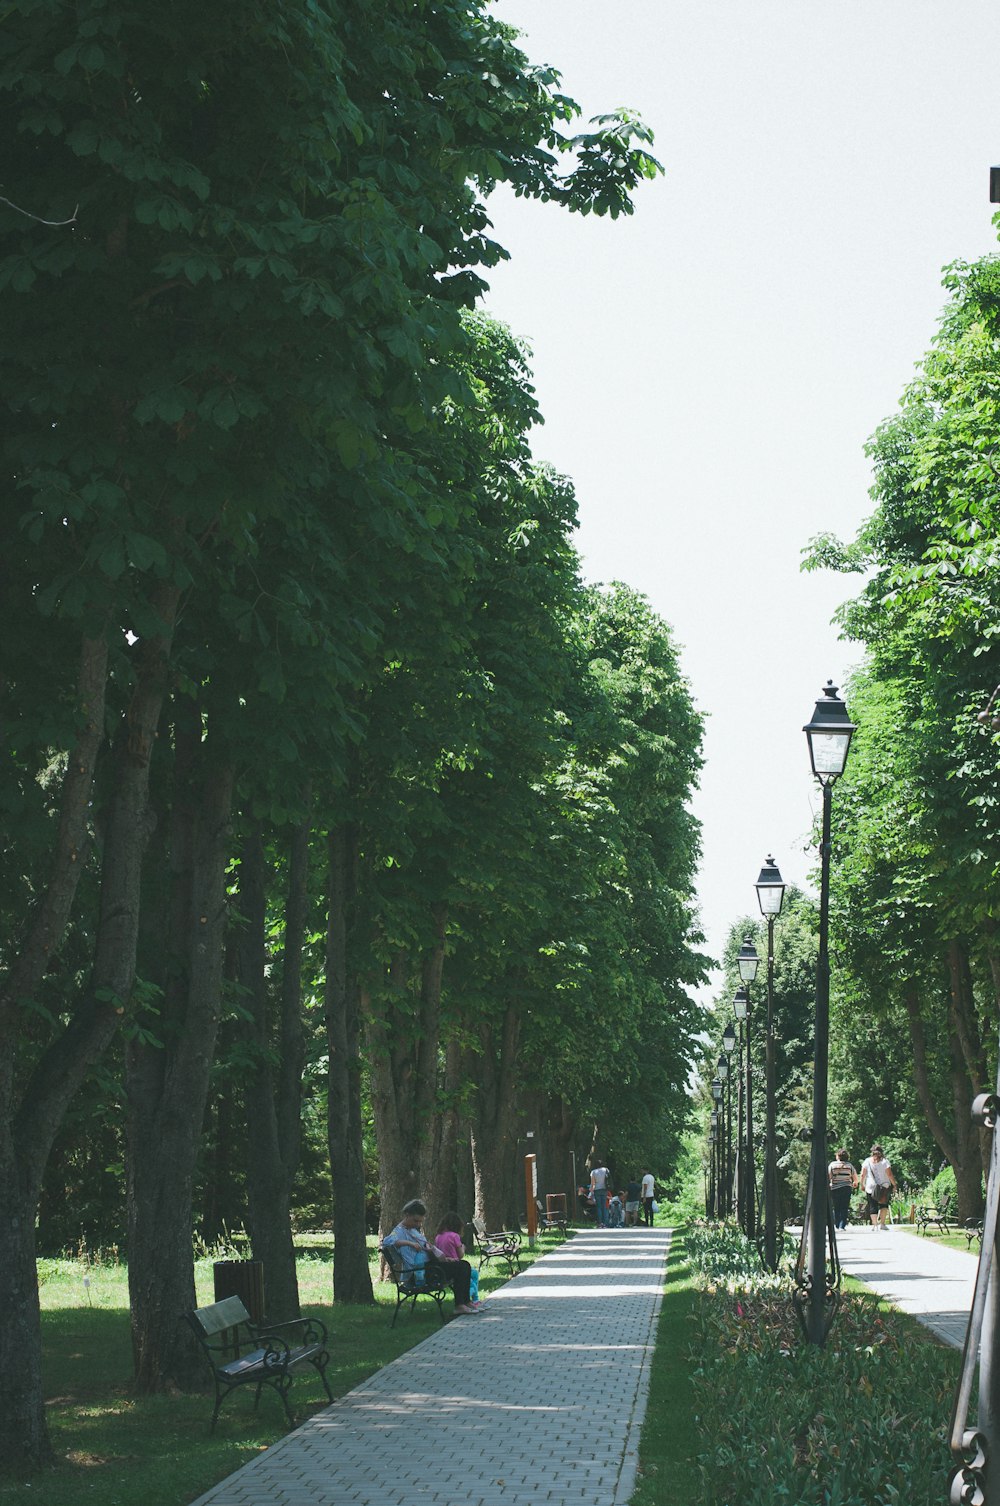 people walking on street surrounded by green trees during daytime